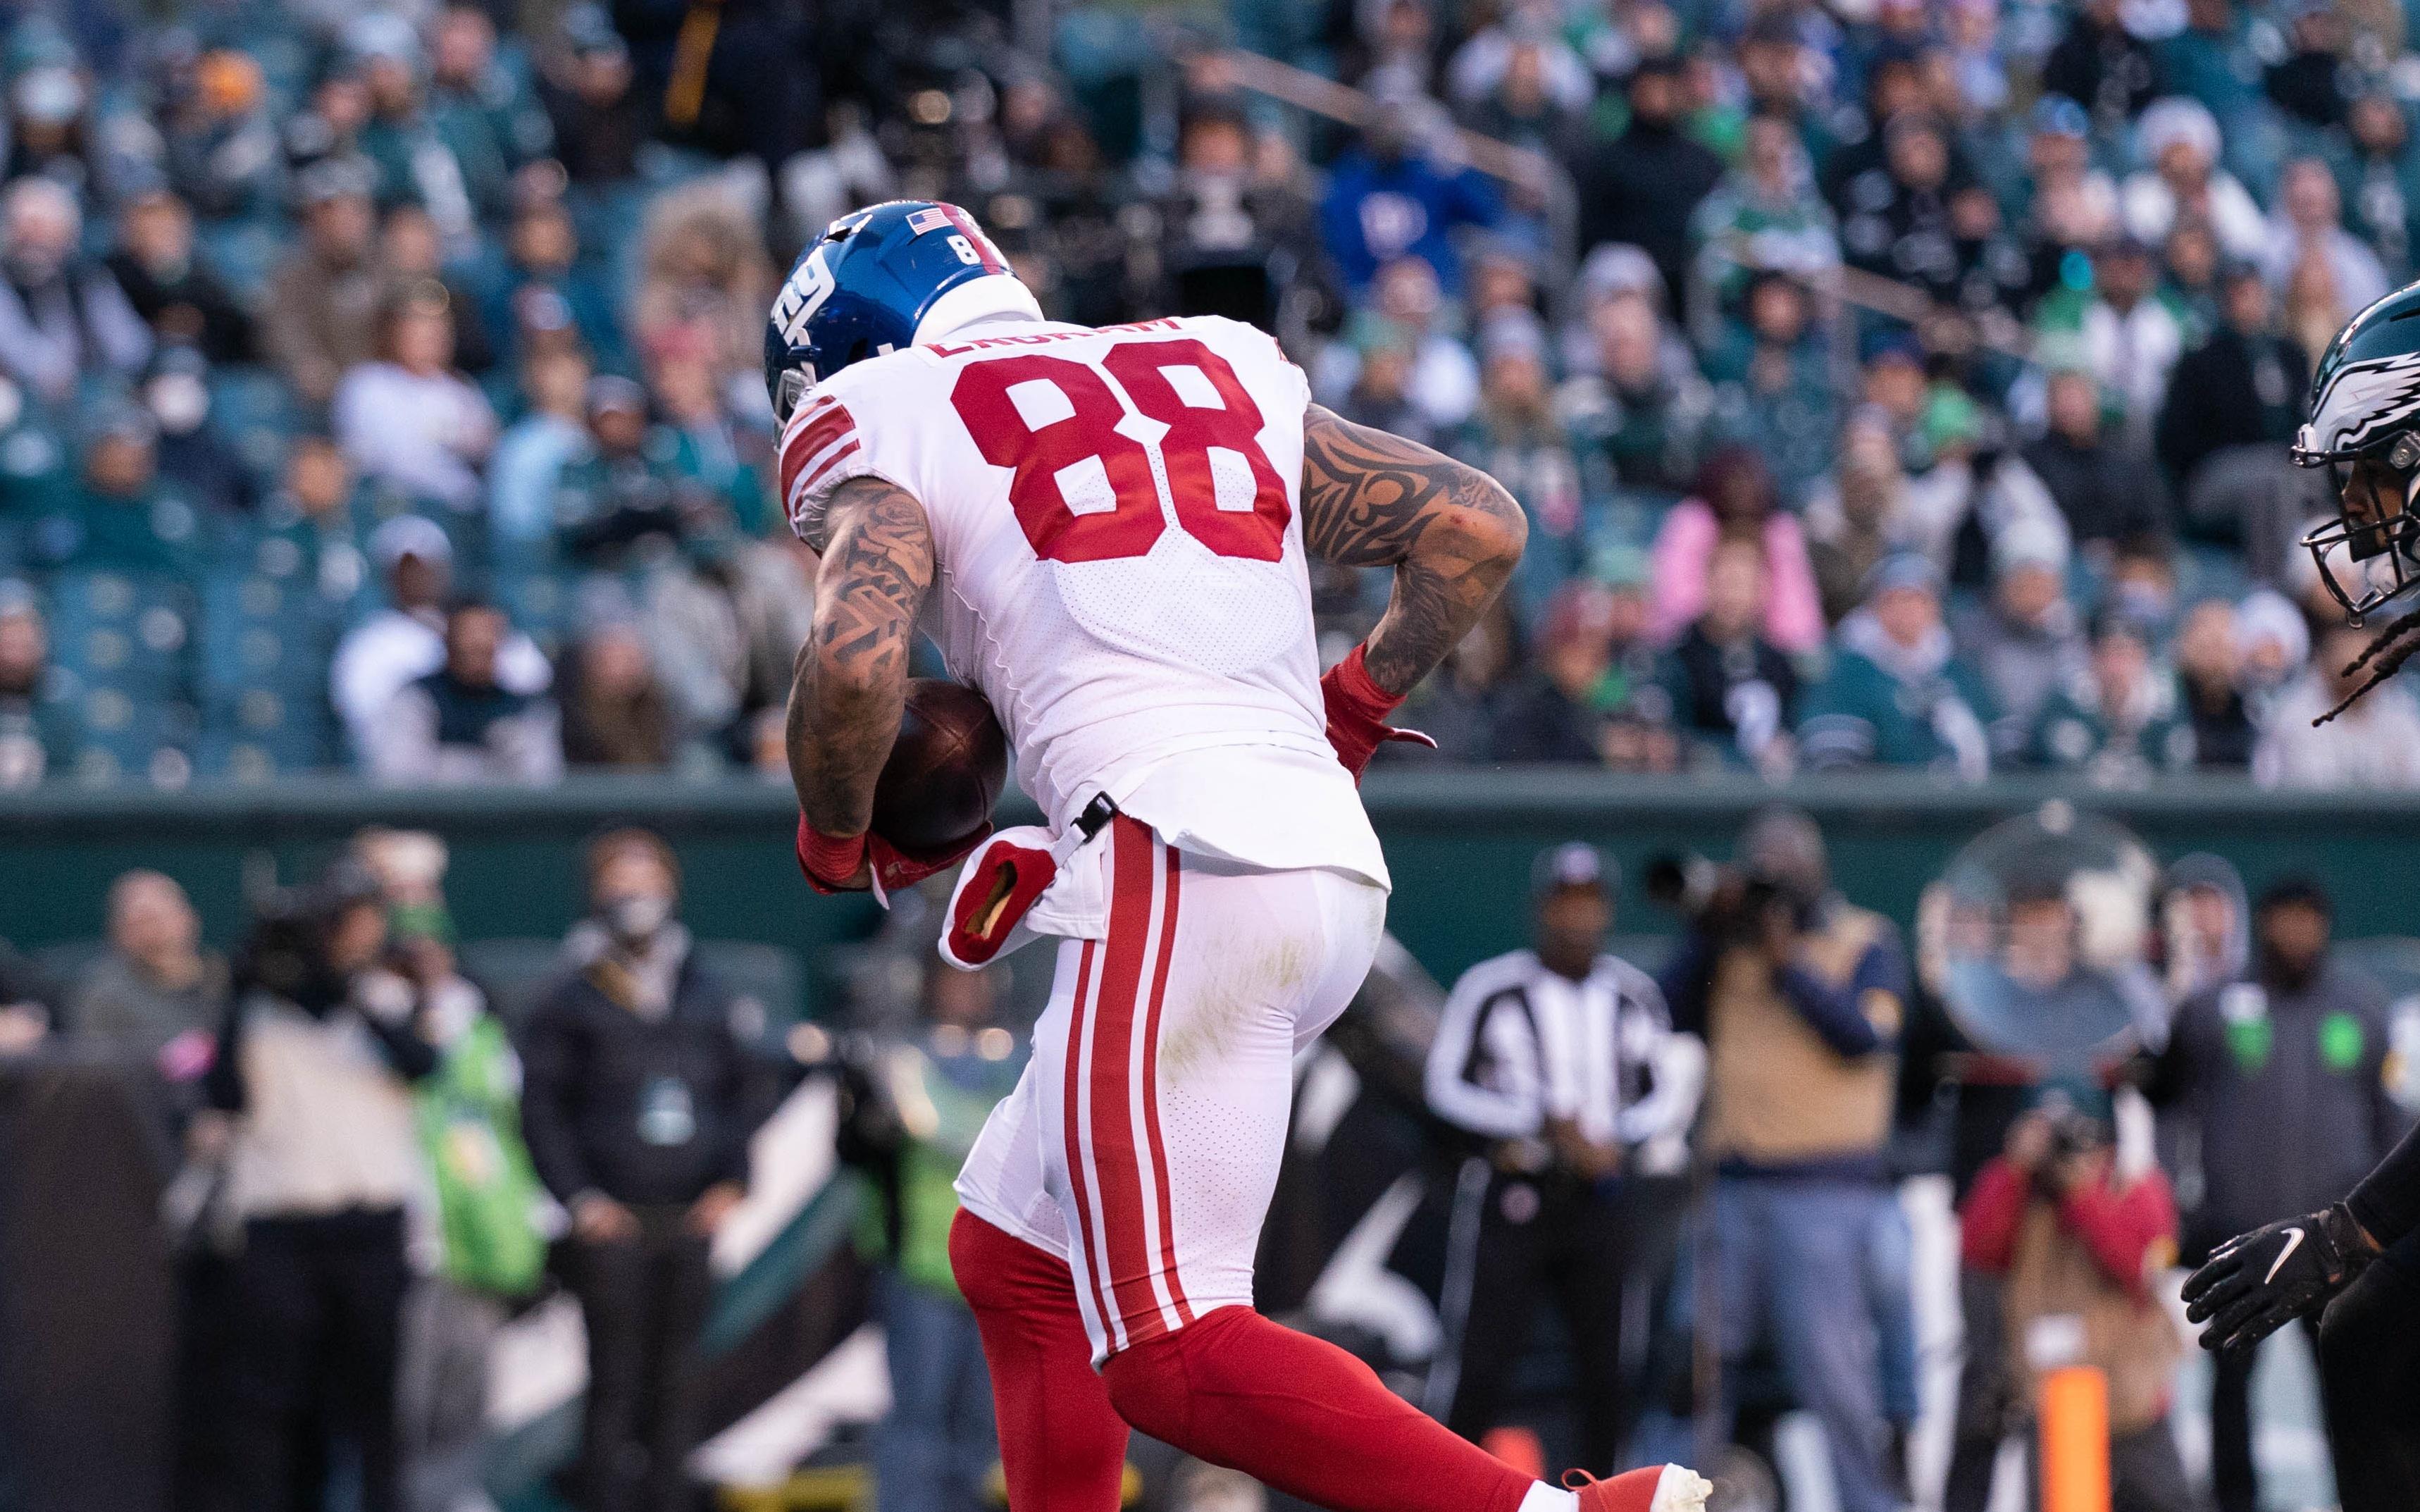 Dec 26, 2021; Philadelphia, Pennsylvania, USA; New York Giants tight end Evan Engram (88) scores a touchdown against the Philadelphia Eagles during the fourth quarter at Lincoln Financial Field. Mandatory Credit: Bill Streicher-USA TODAY Sports / © Bill Streicher-USA TODAY Sports